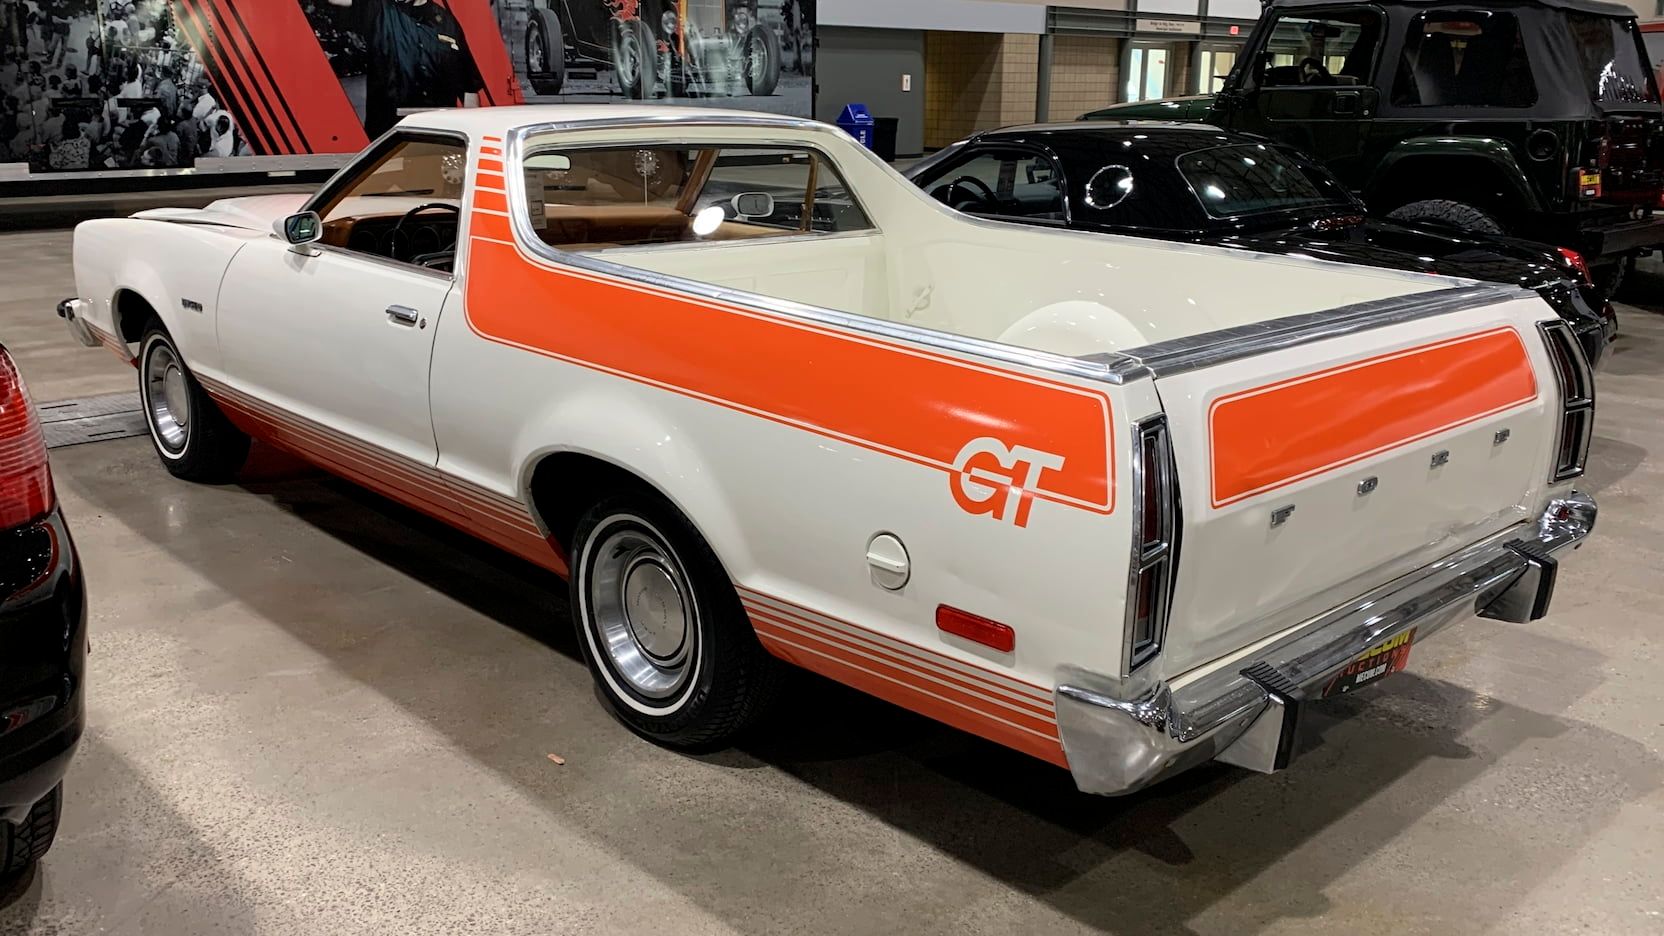 A parked 1977 Ford Ranchero GT on display